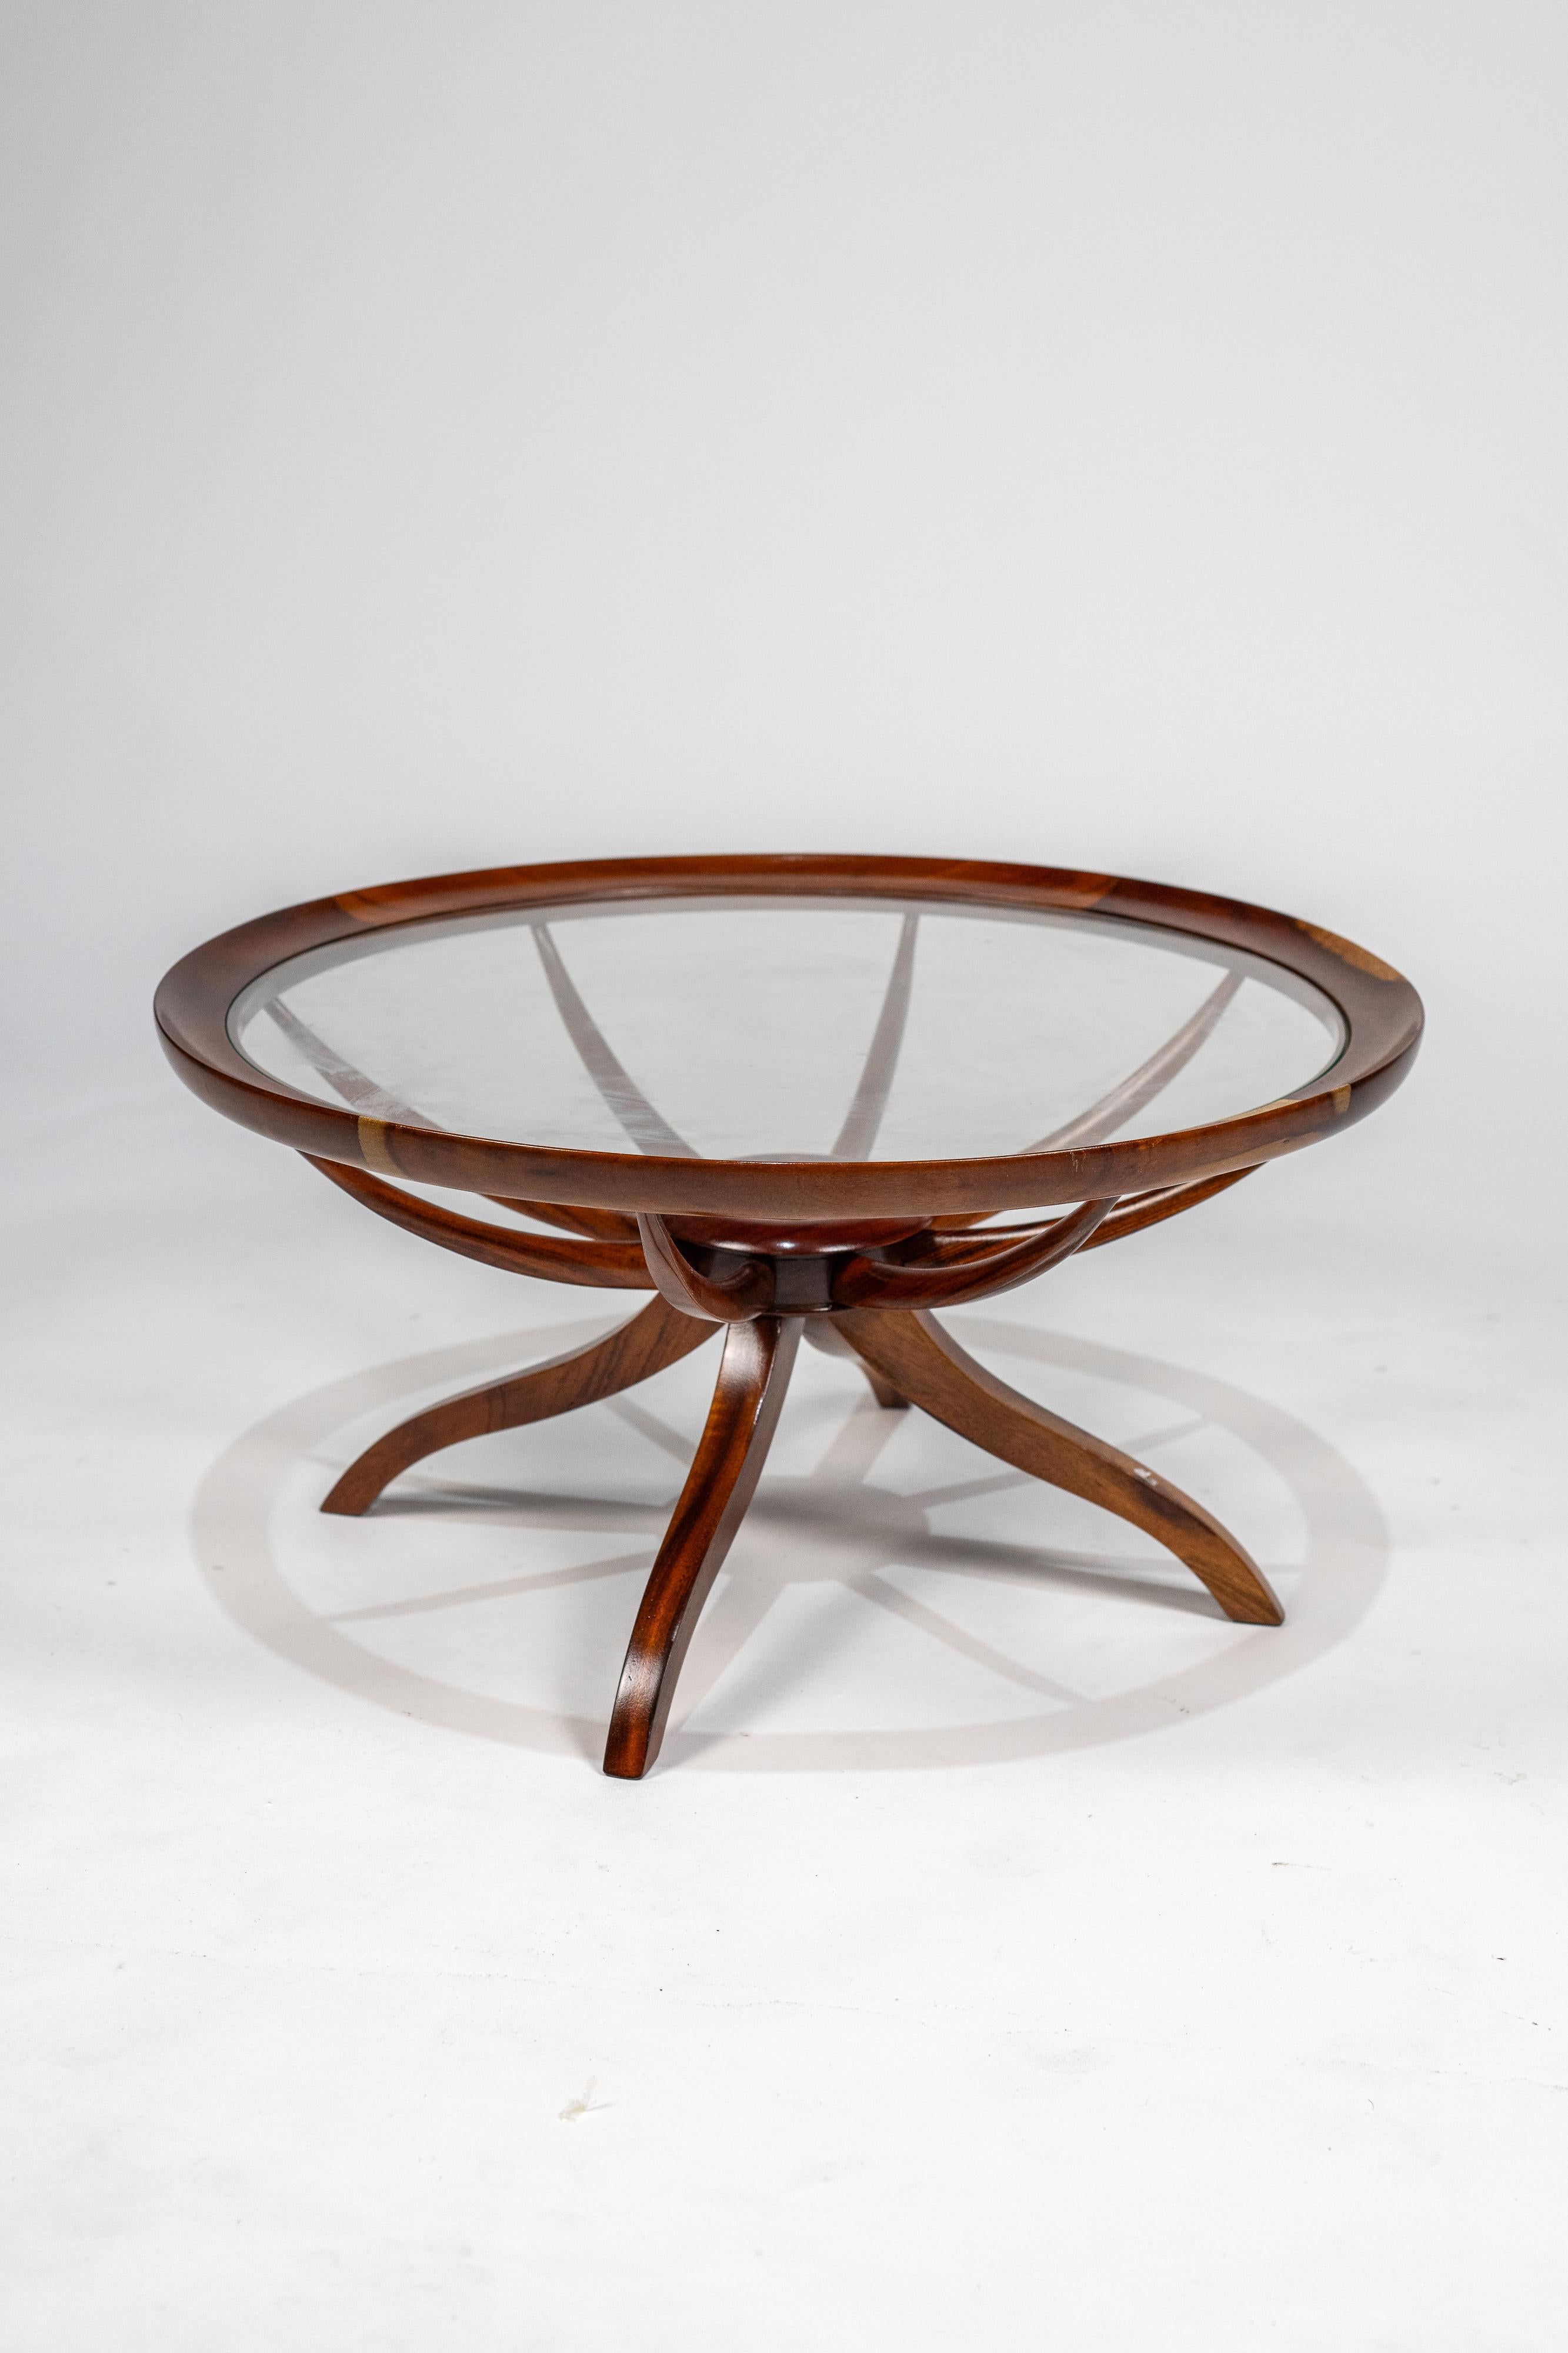 Giuseppe Scapinelli. Coffee table 